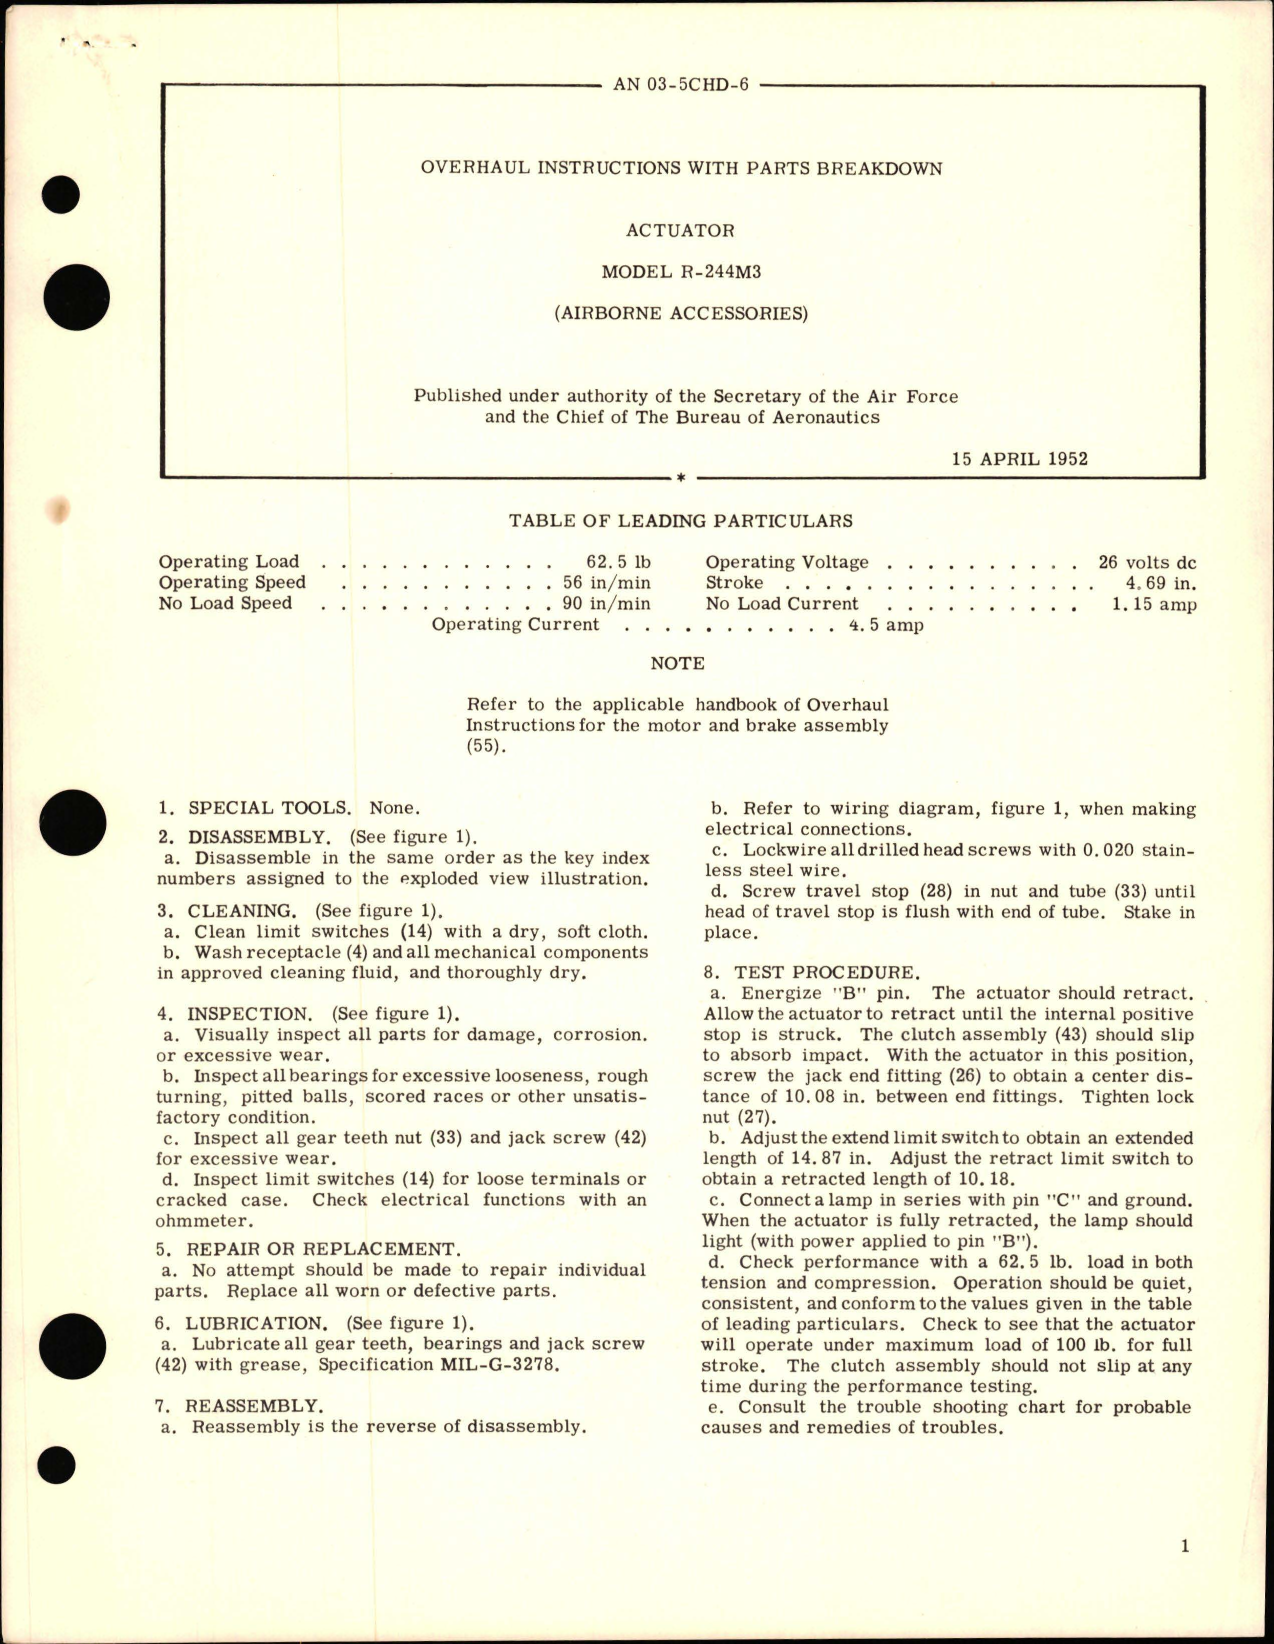 Sample page 1 from AirCorps Library document: Overhaul Instructions with Parts Breakdown for Actuator - Model R-244M3 